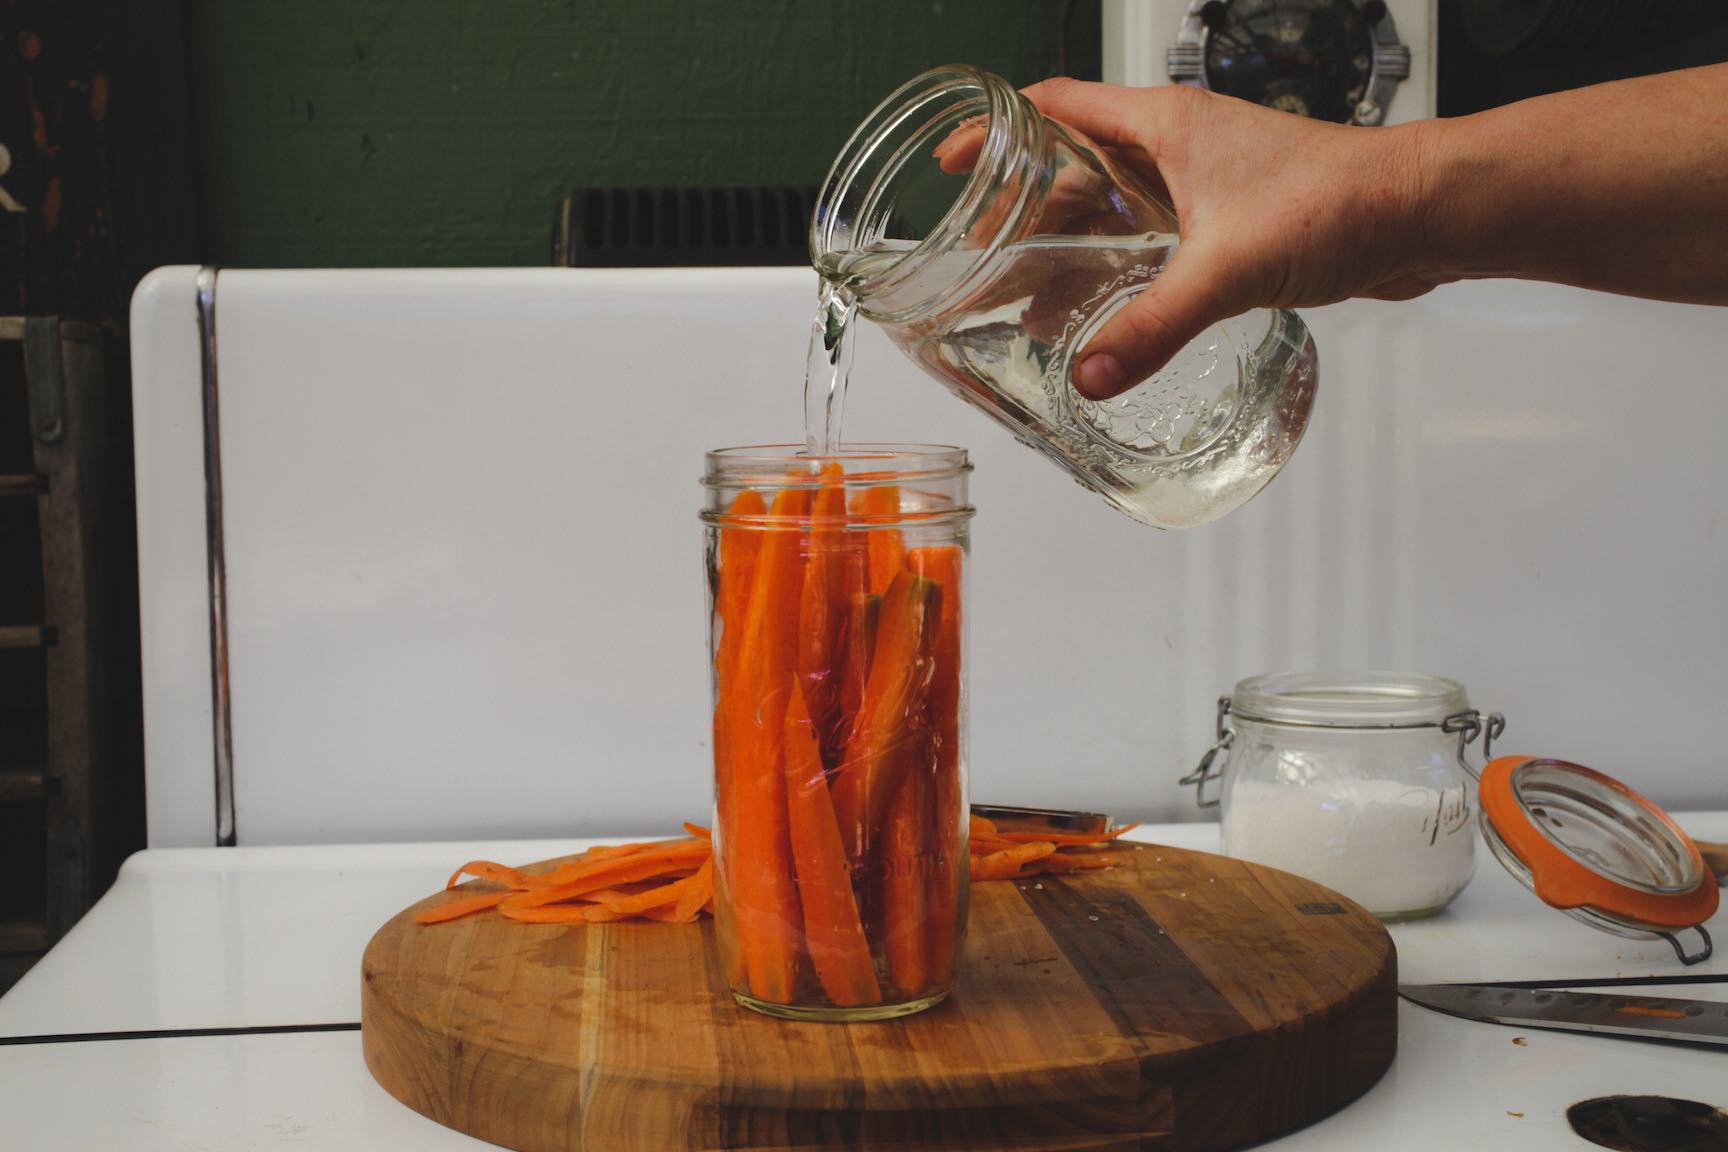 fermented carrot stick recipe perfect healthy snack for kids